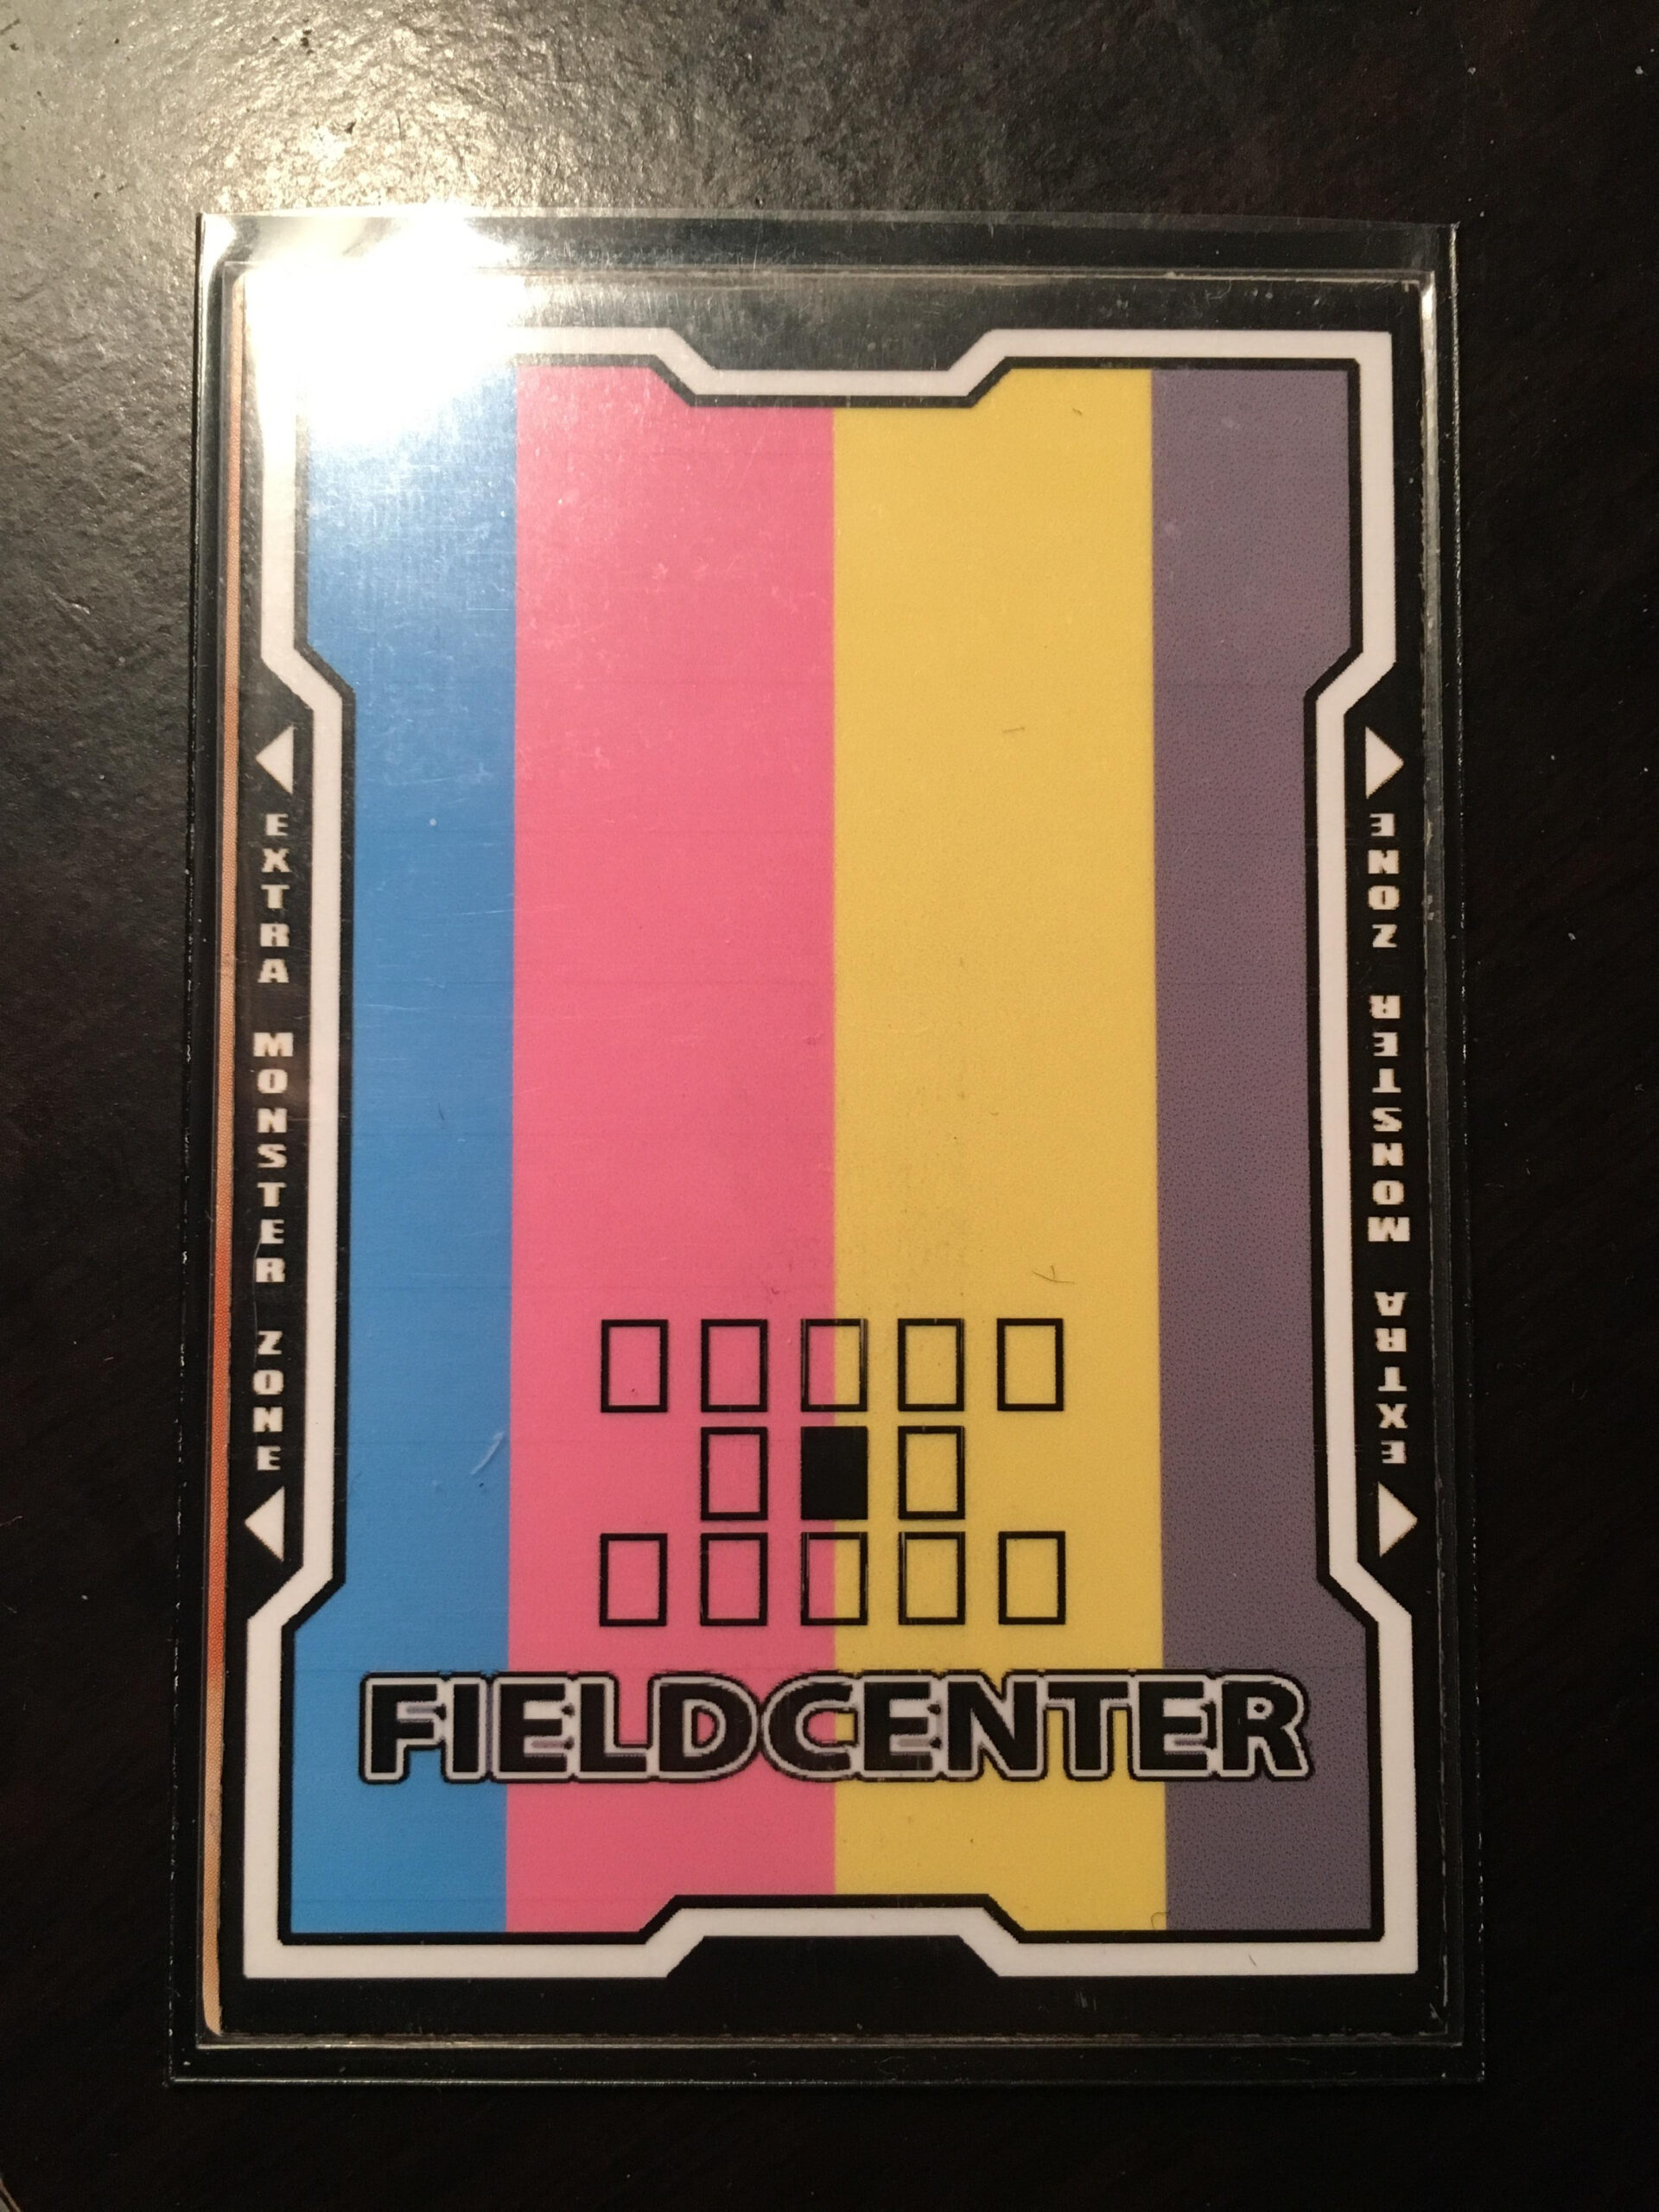 Does Reddit Like The Field Center Card I Made? I'm Super Throughout Yugioh Card Template